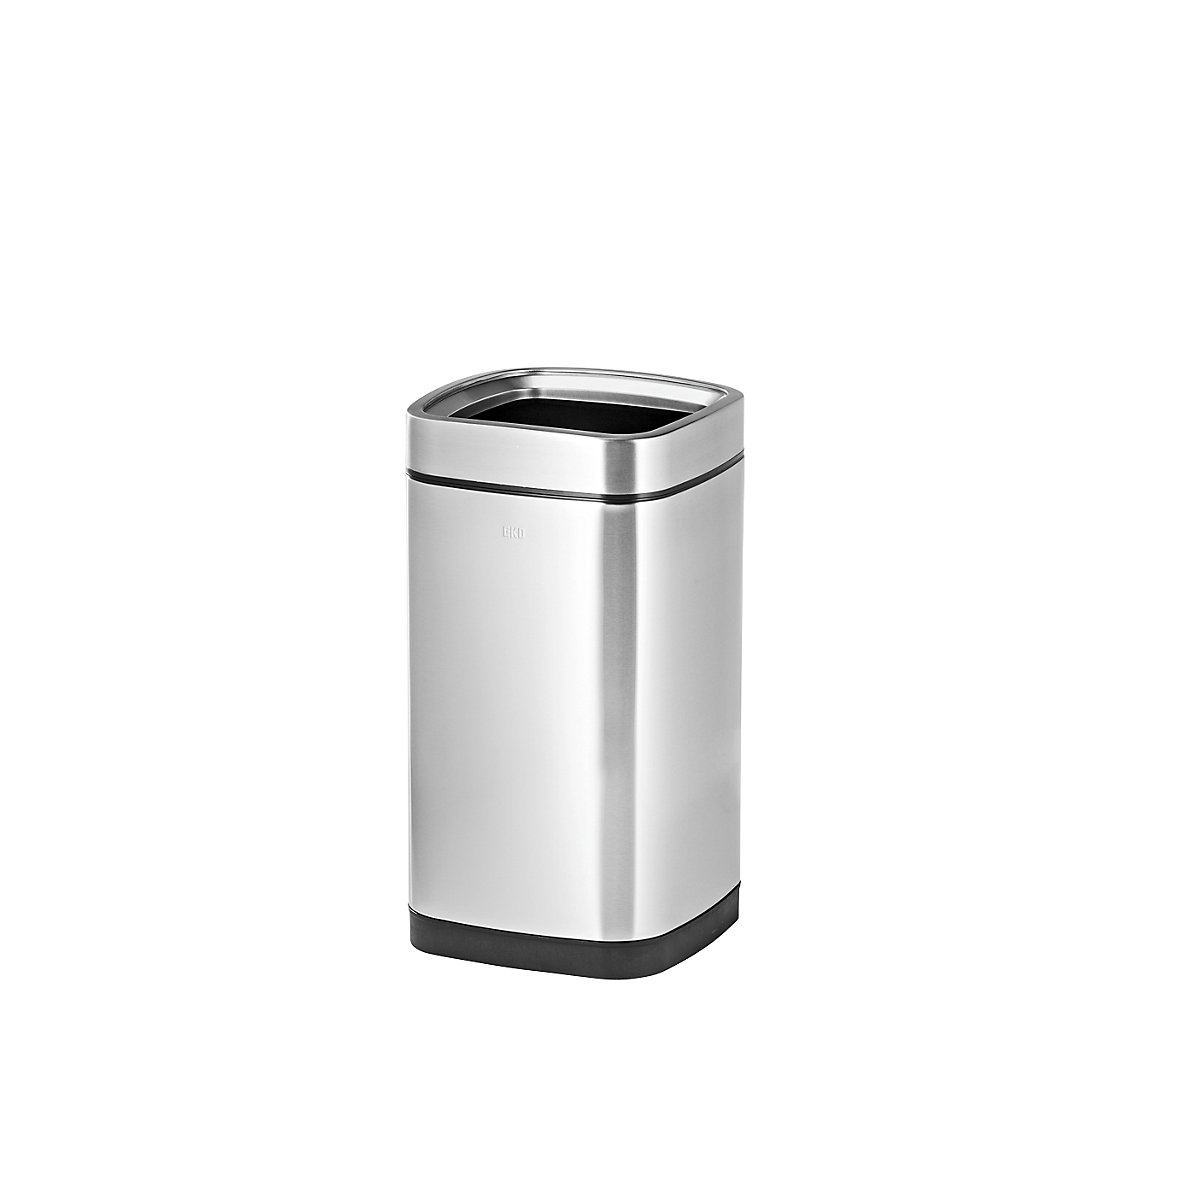 Waste paper bin with inner container – EKO, capacity 28 l, stainless steel-5